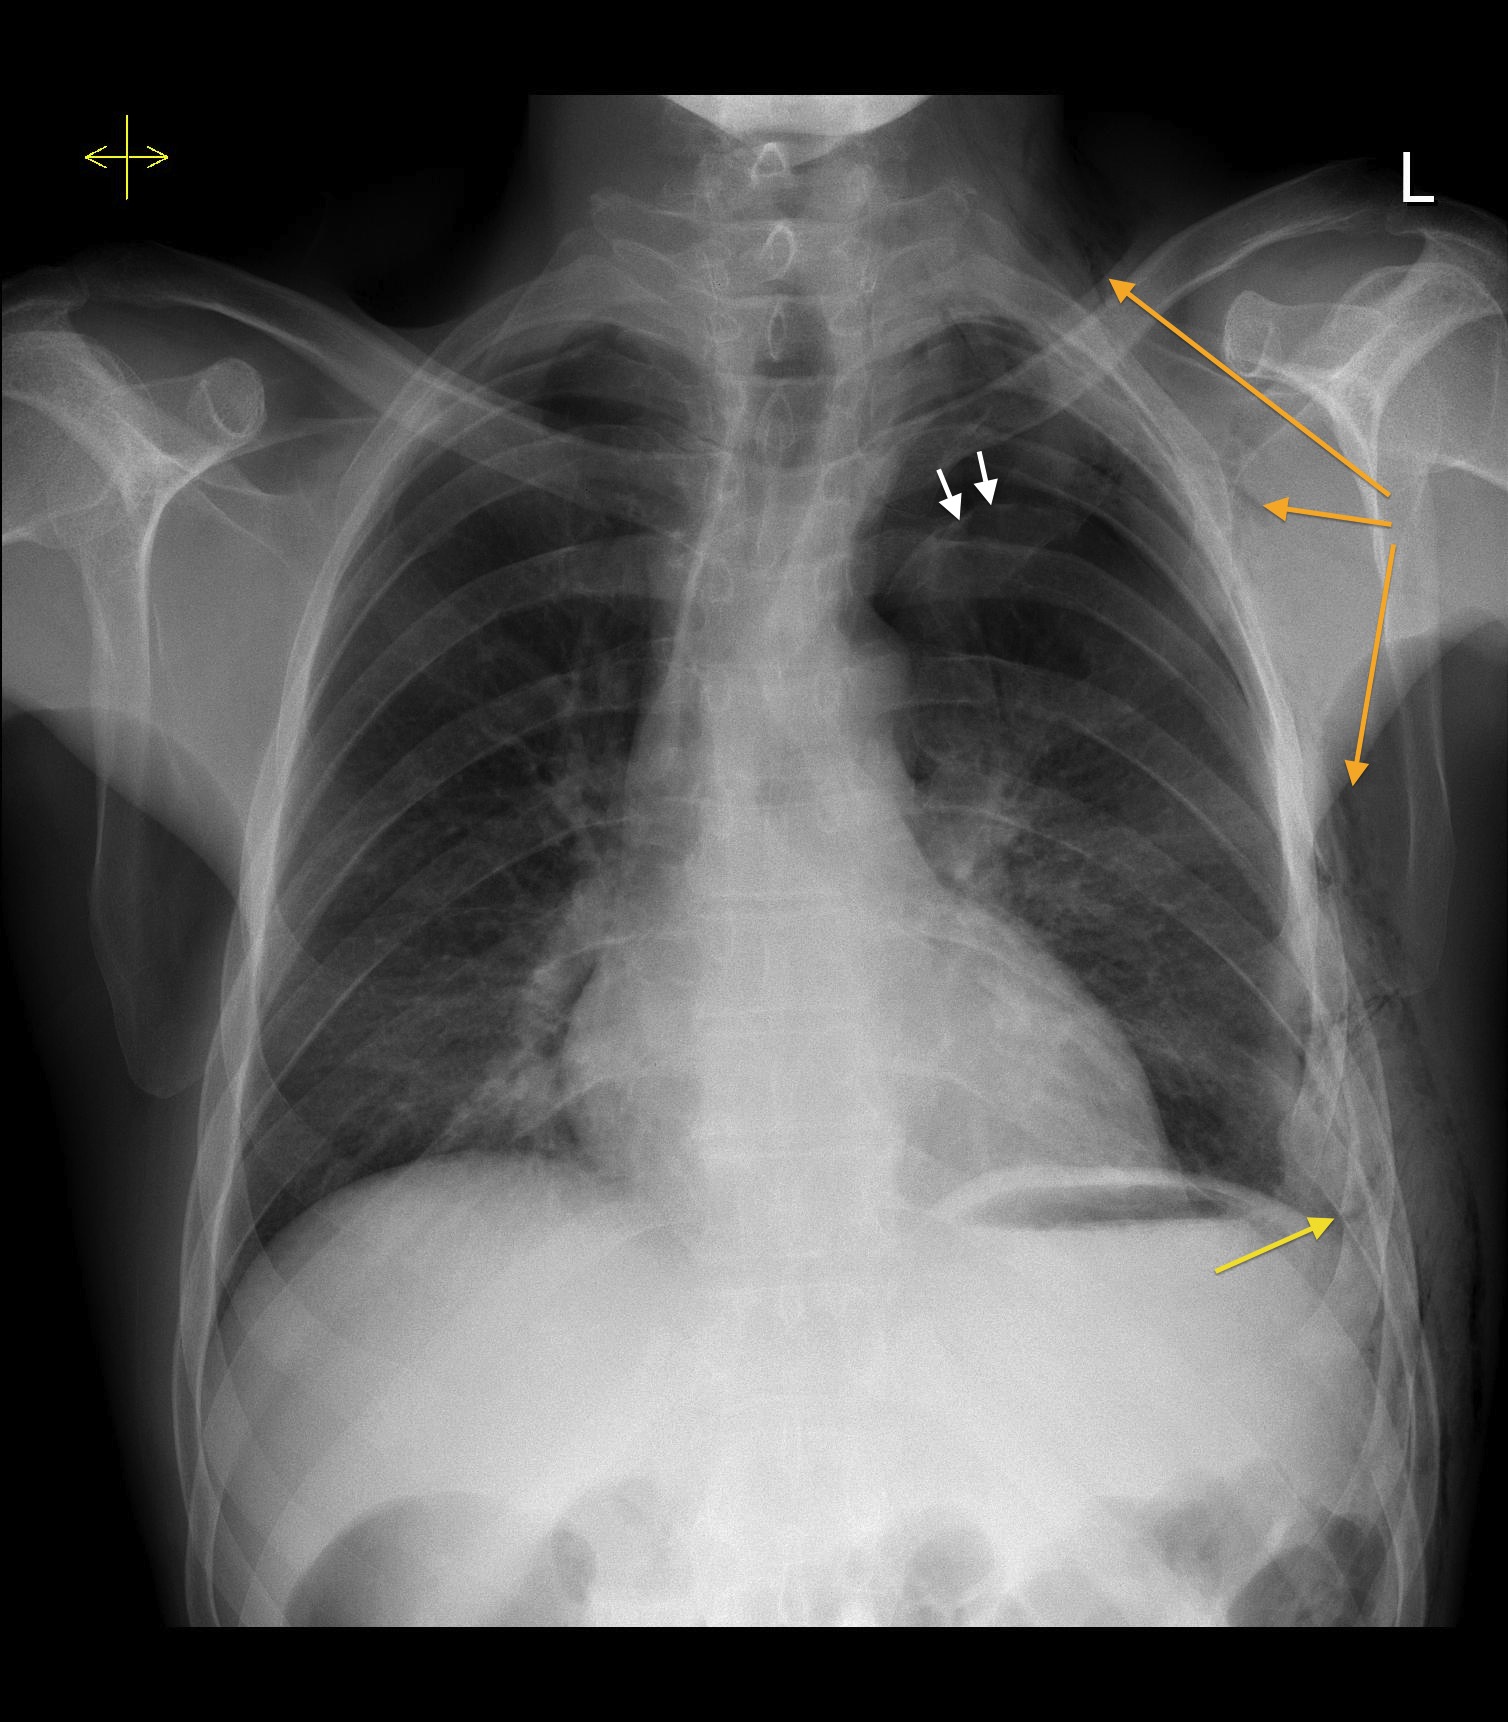 Tension Pneumothorax Due To Rib Fracture Radiology At St Vincent S